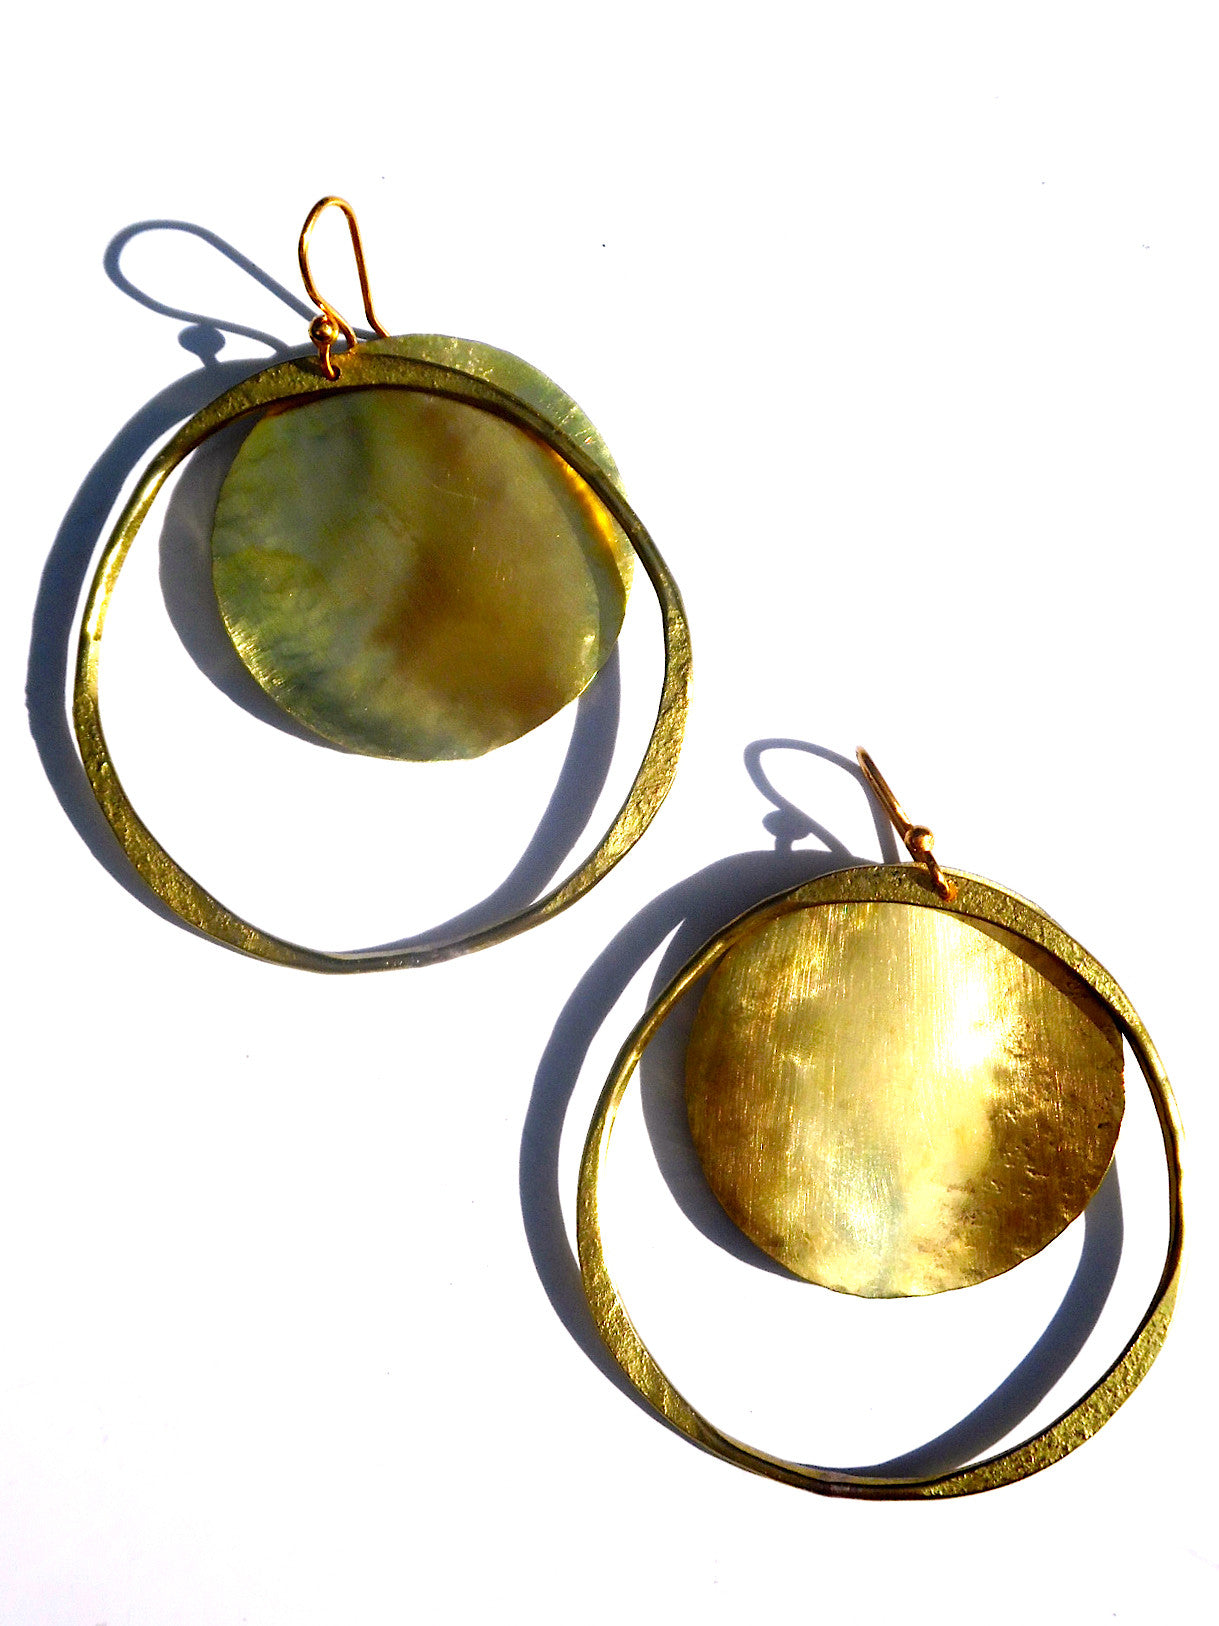 Earrings Hoop And Disc Patina And Gold On Brass